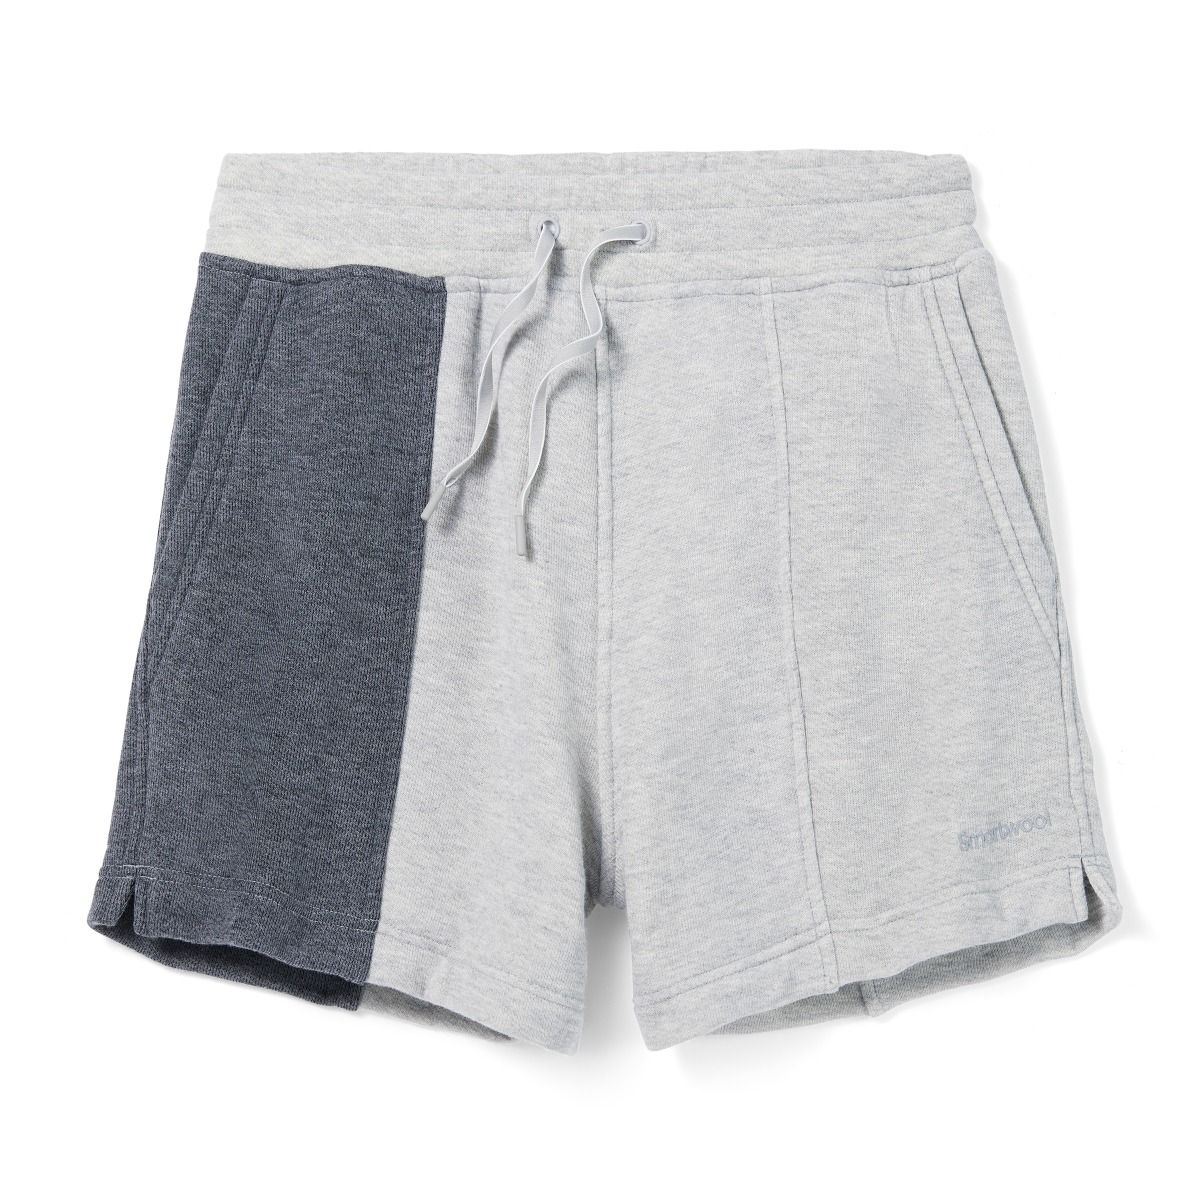 All In Motion Shorts White Size M - $15 (40% Off Retail) - From Betty